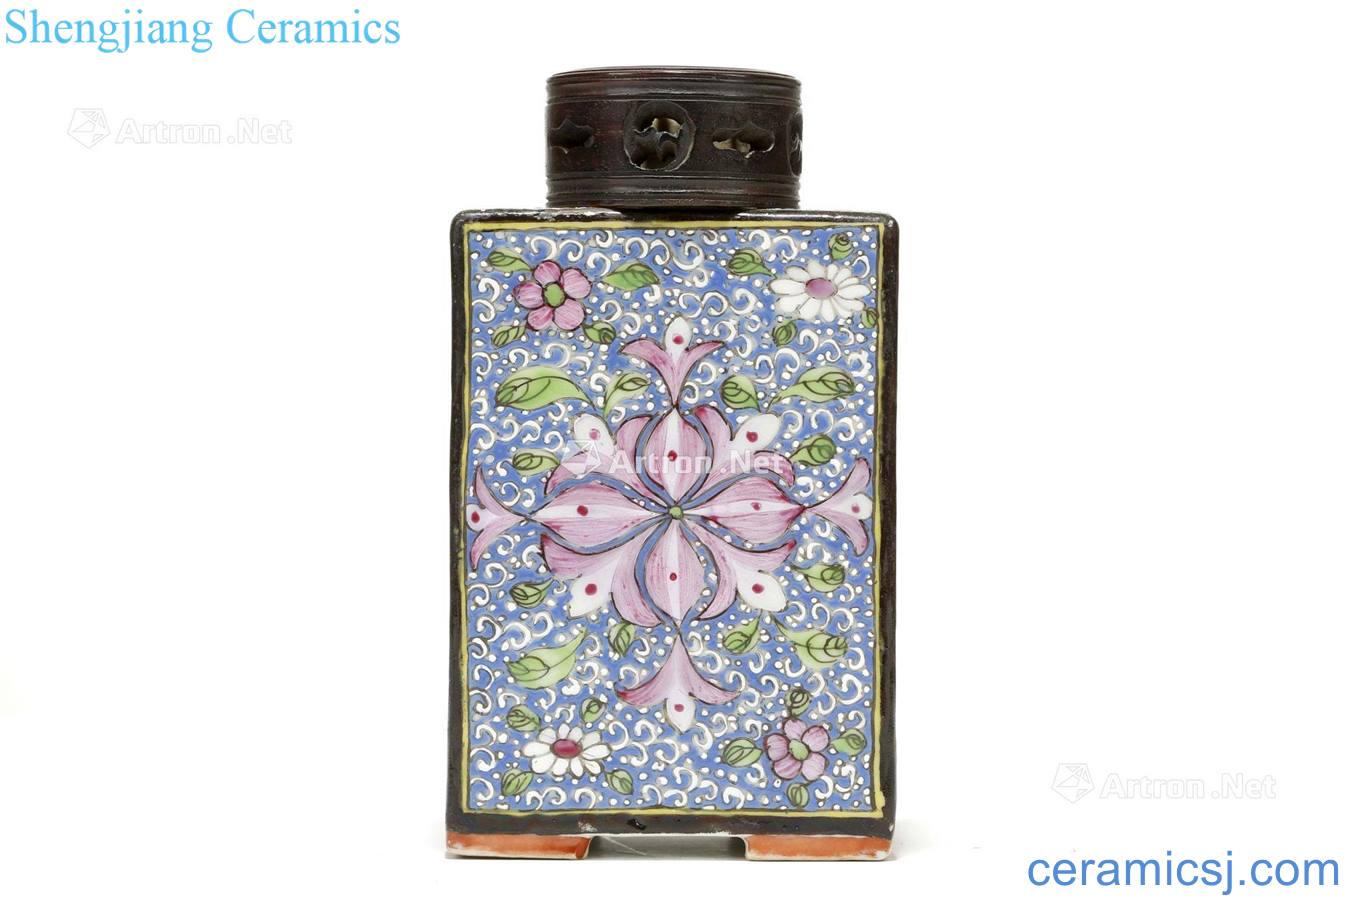 In the qing dynasty square enamel caddy